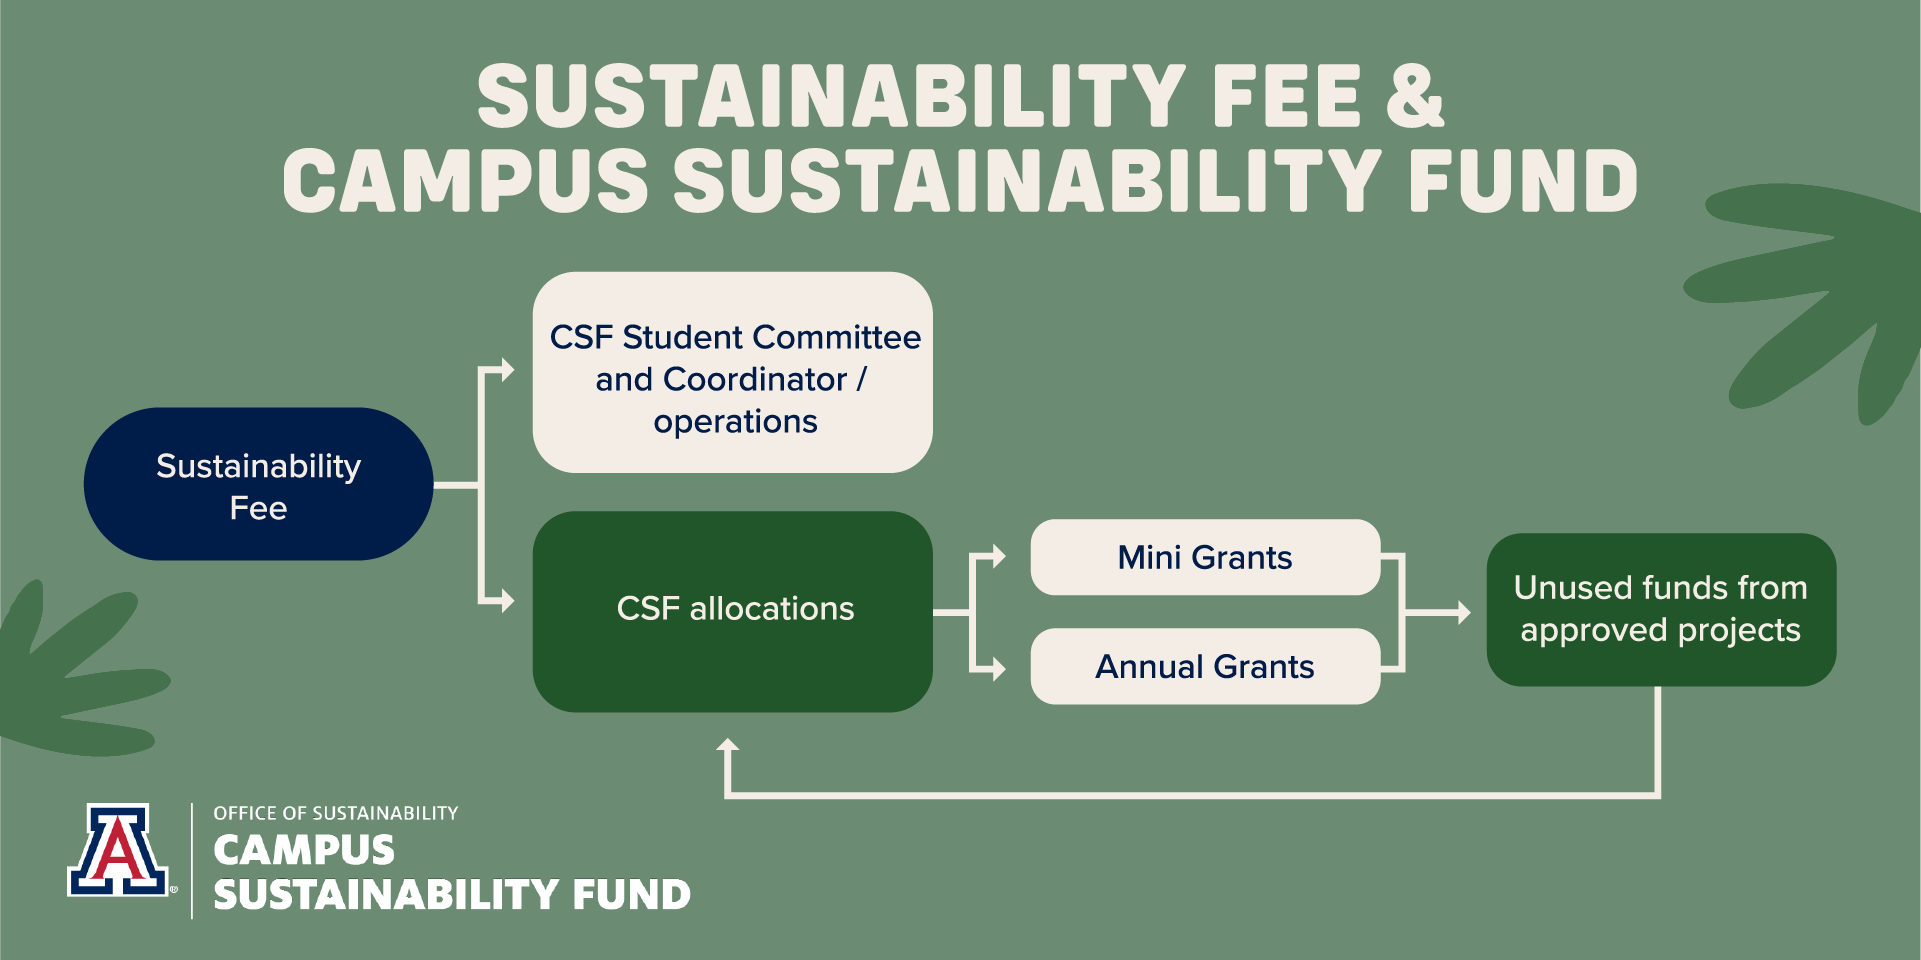 The Campus Sustainability Fund is the sole beneficiary of the Sustainability Fee. The Fee is dispersed to support the CSF in two ways: To the Committee, Coordinator, and operational costs, and through Annual and Mini Grants. Any unused funding from approved Mini and Annual Grants are swept back into the CSF to be allocated to future projects.